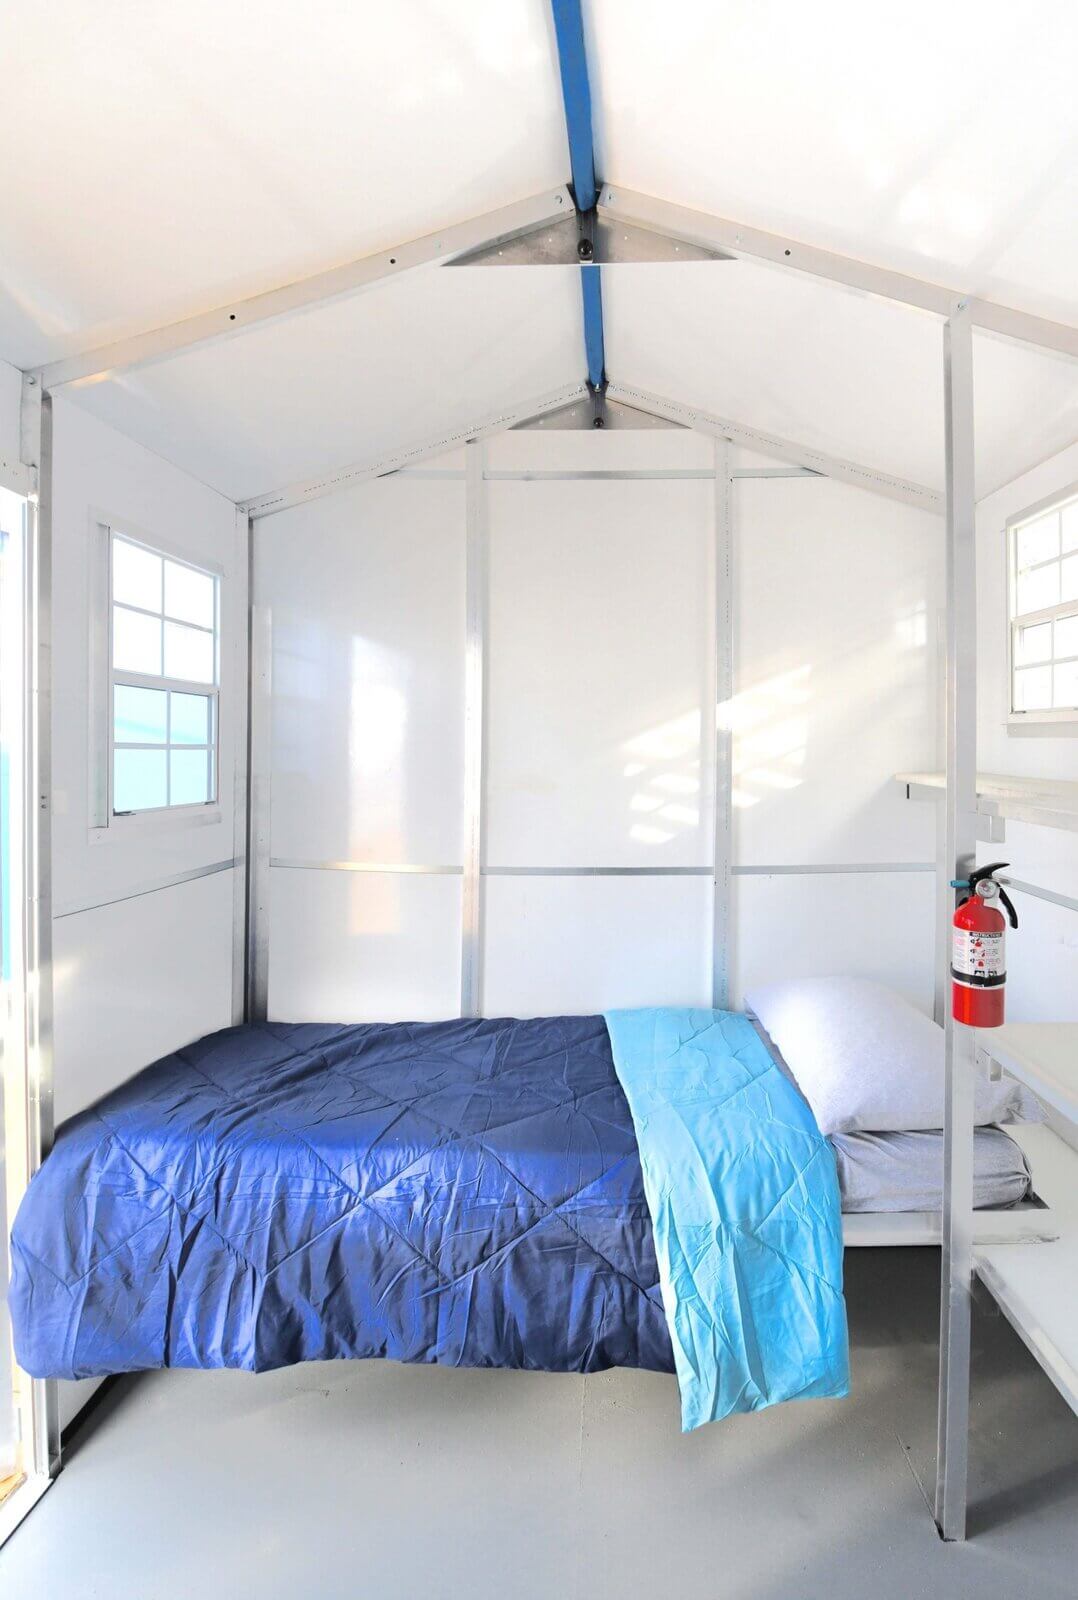 interior of a pallet shelter for homeless residents